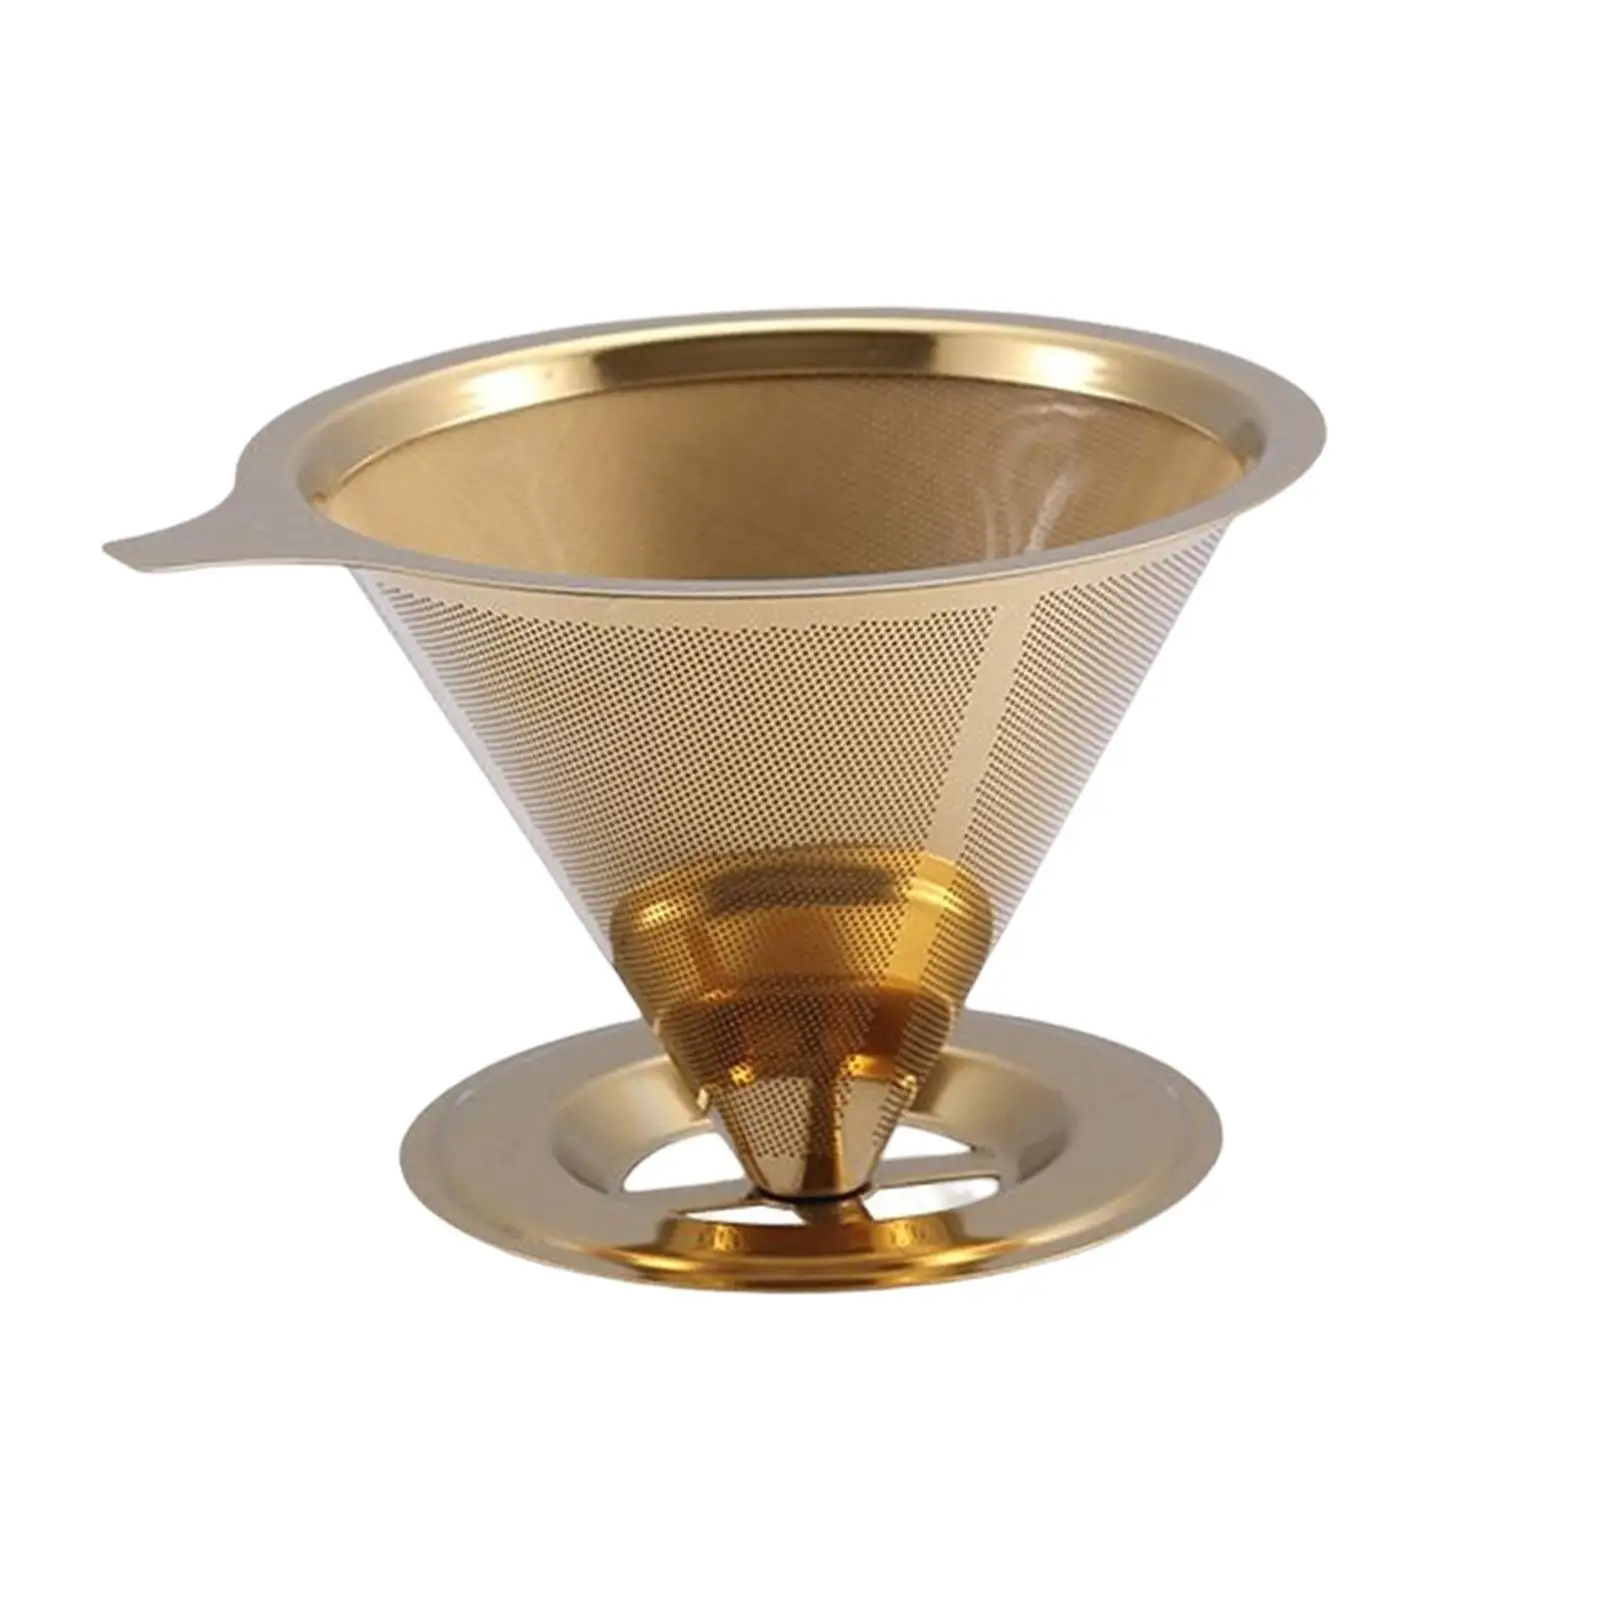 Coffee Filter, Reusable Coffee Dripper, Stainless Steel Drip Coffee Filters,